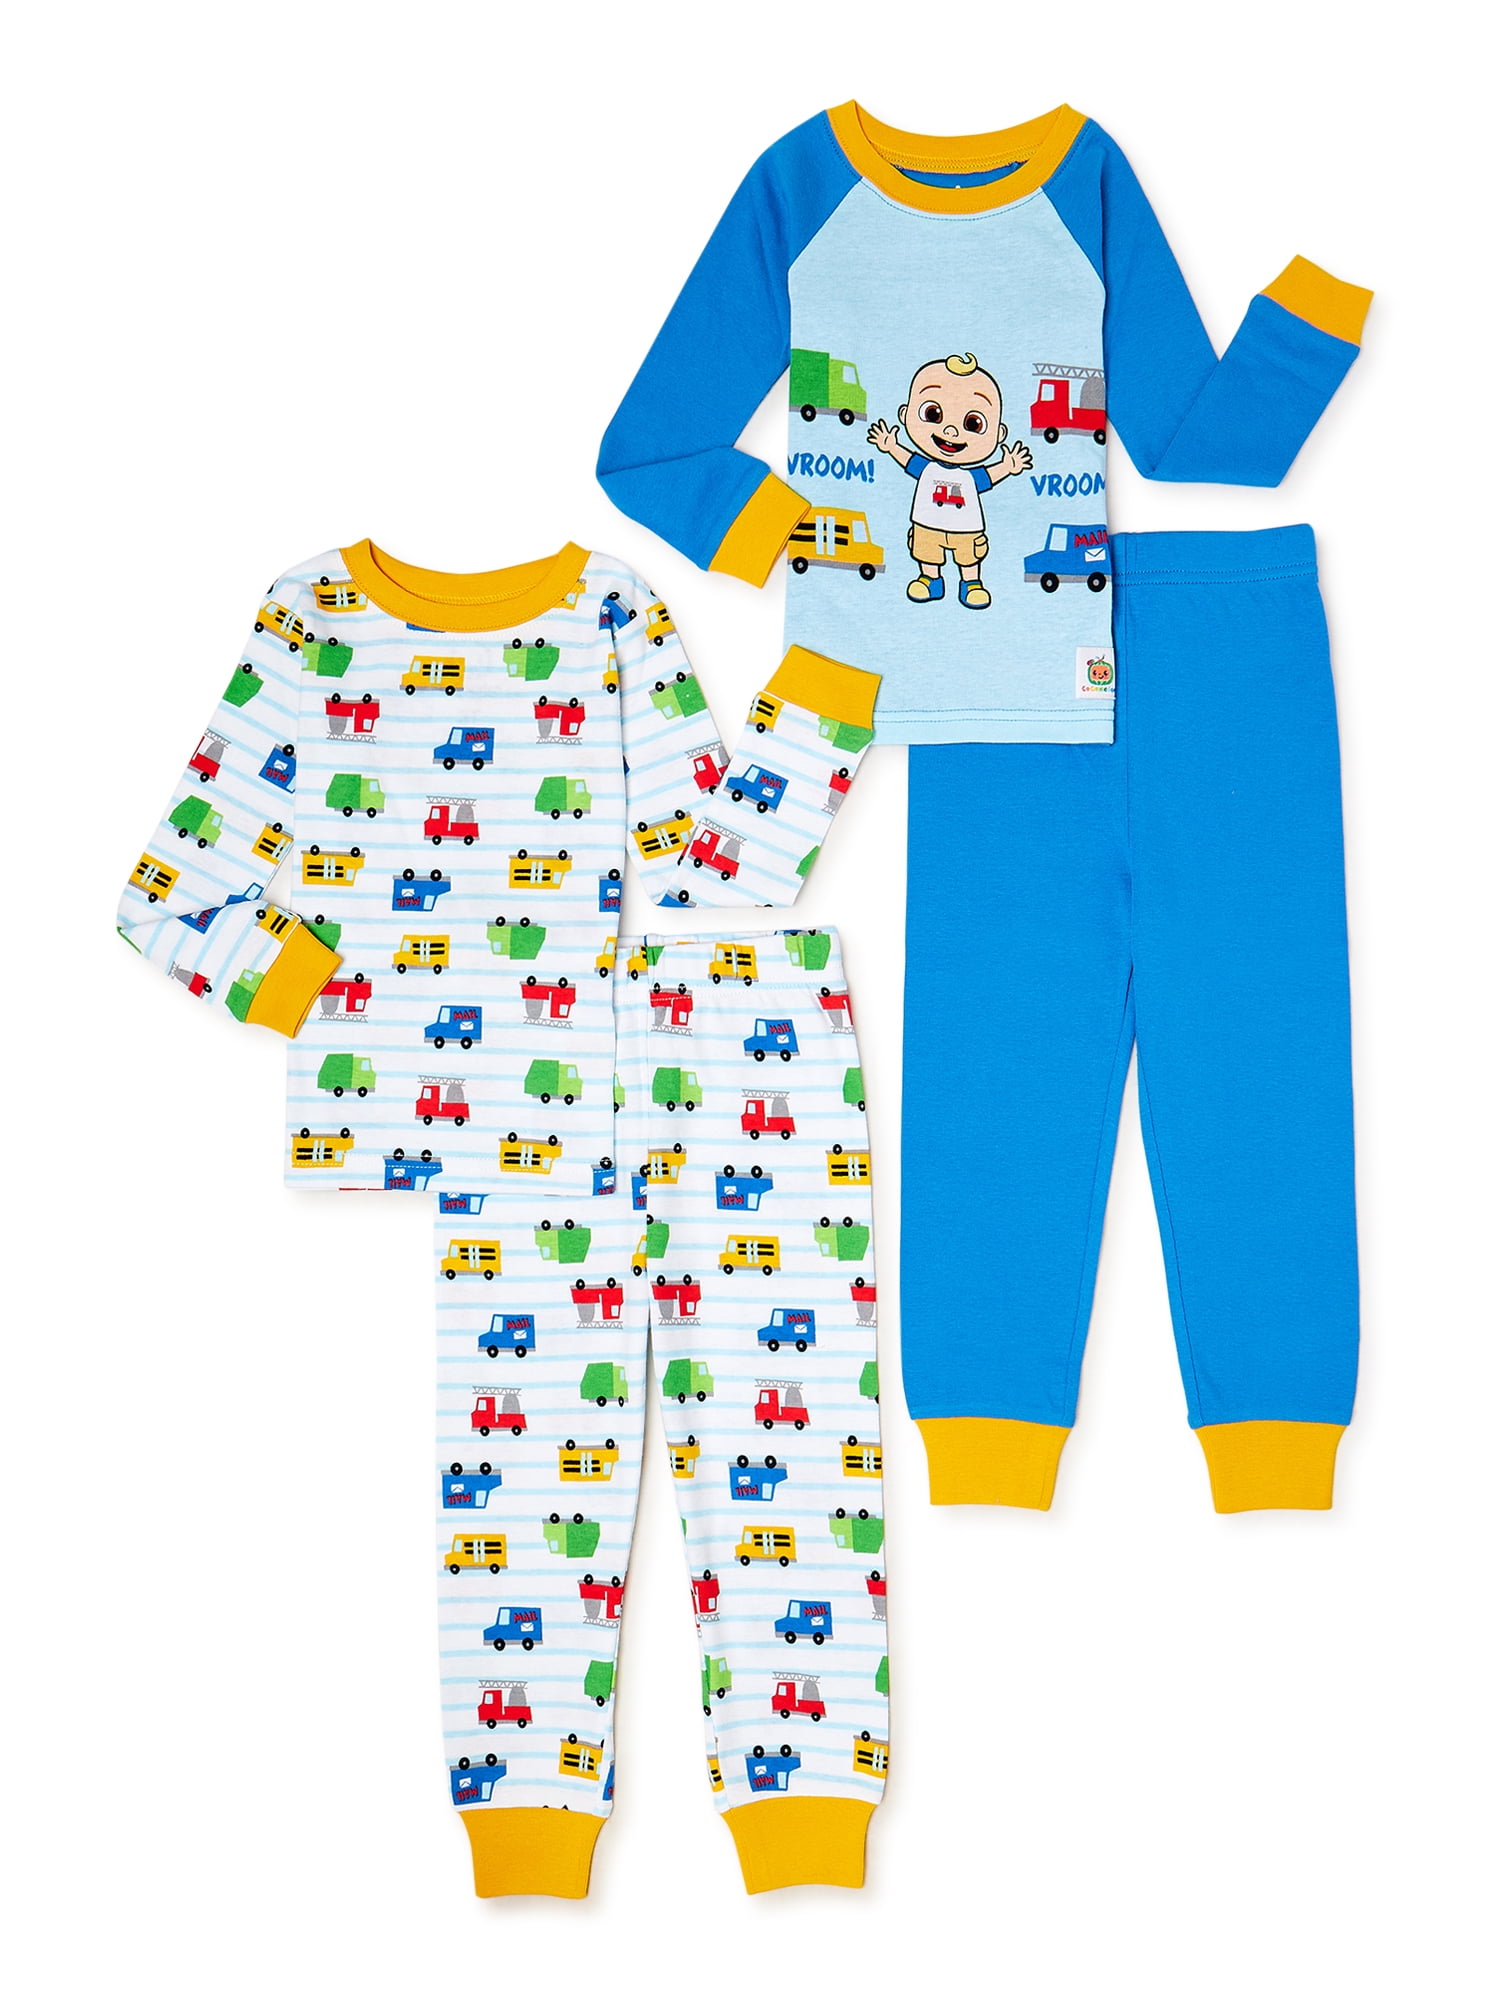 CoComelon Boys Pyjamas Cotton PJ Set Ages 12 Months to 4 Years Old 